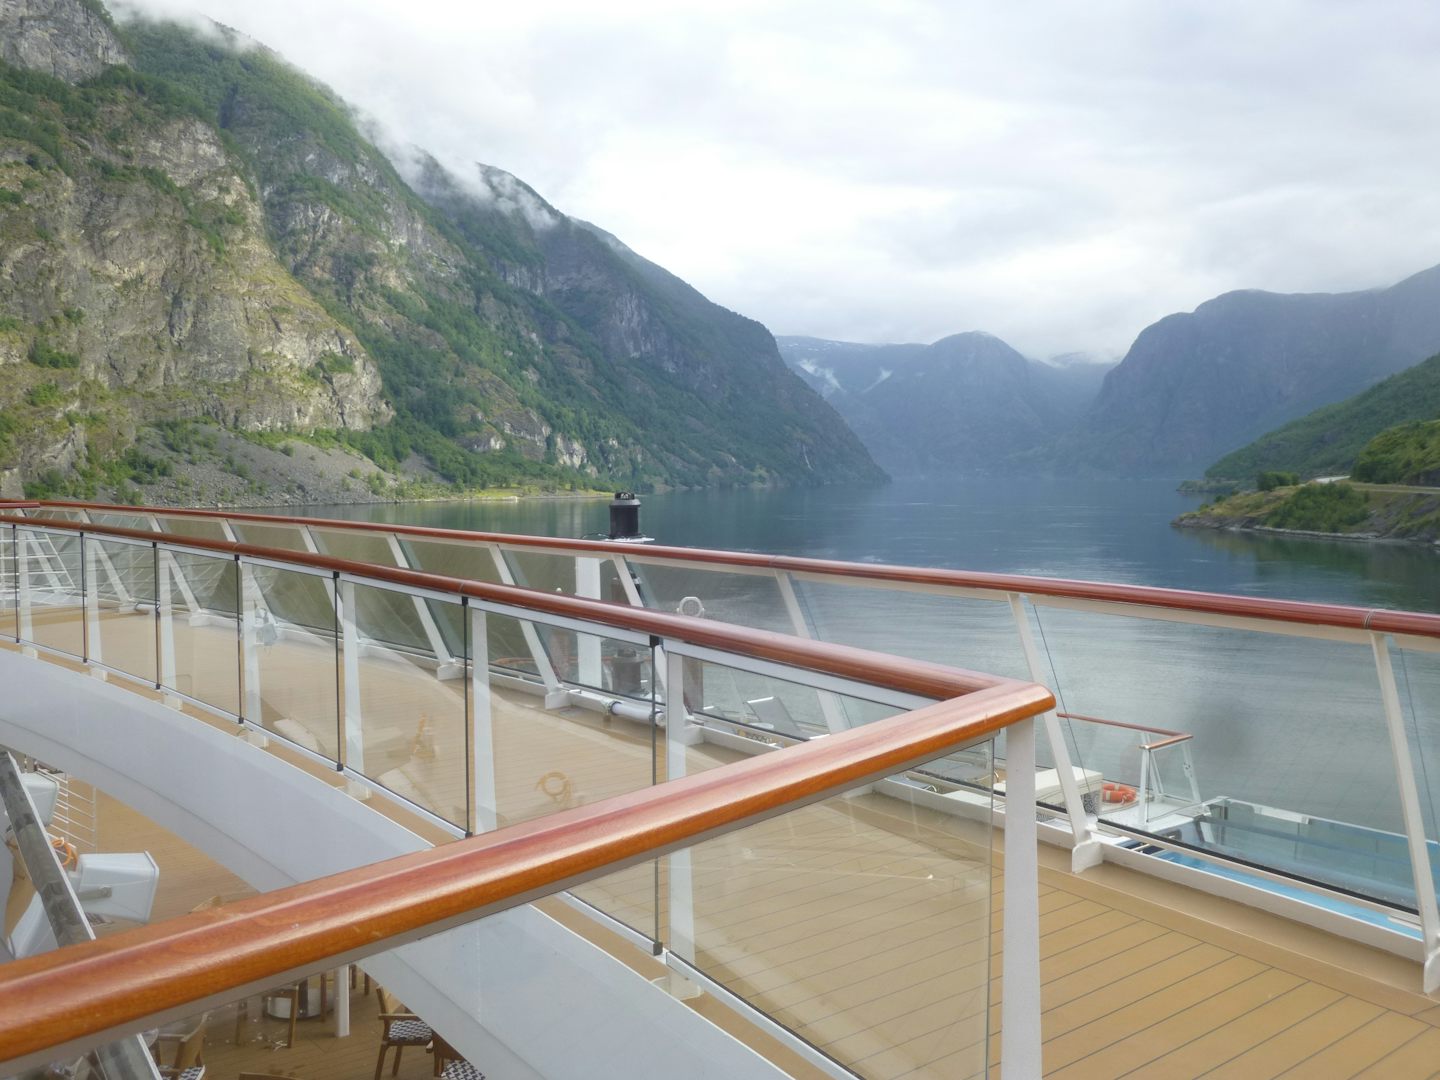 One of the fjords in Norway, from the rear deck.